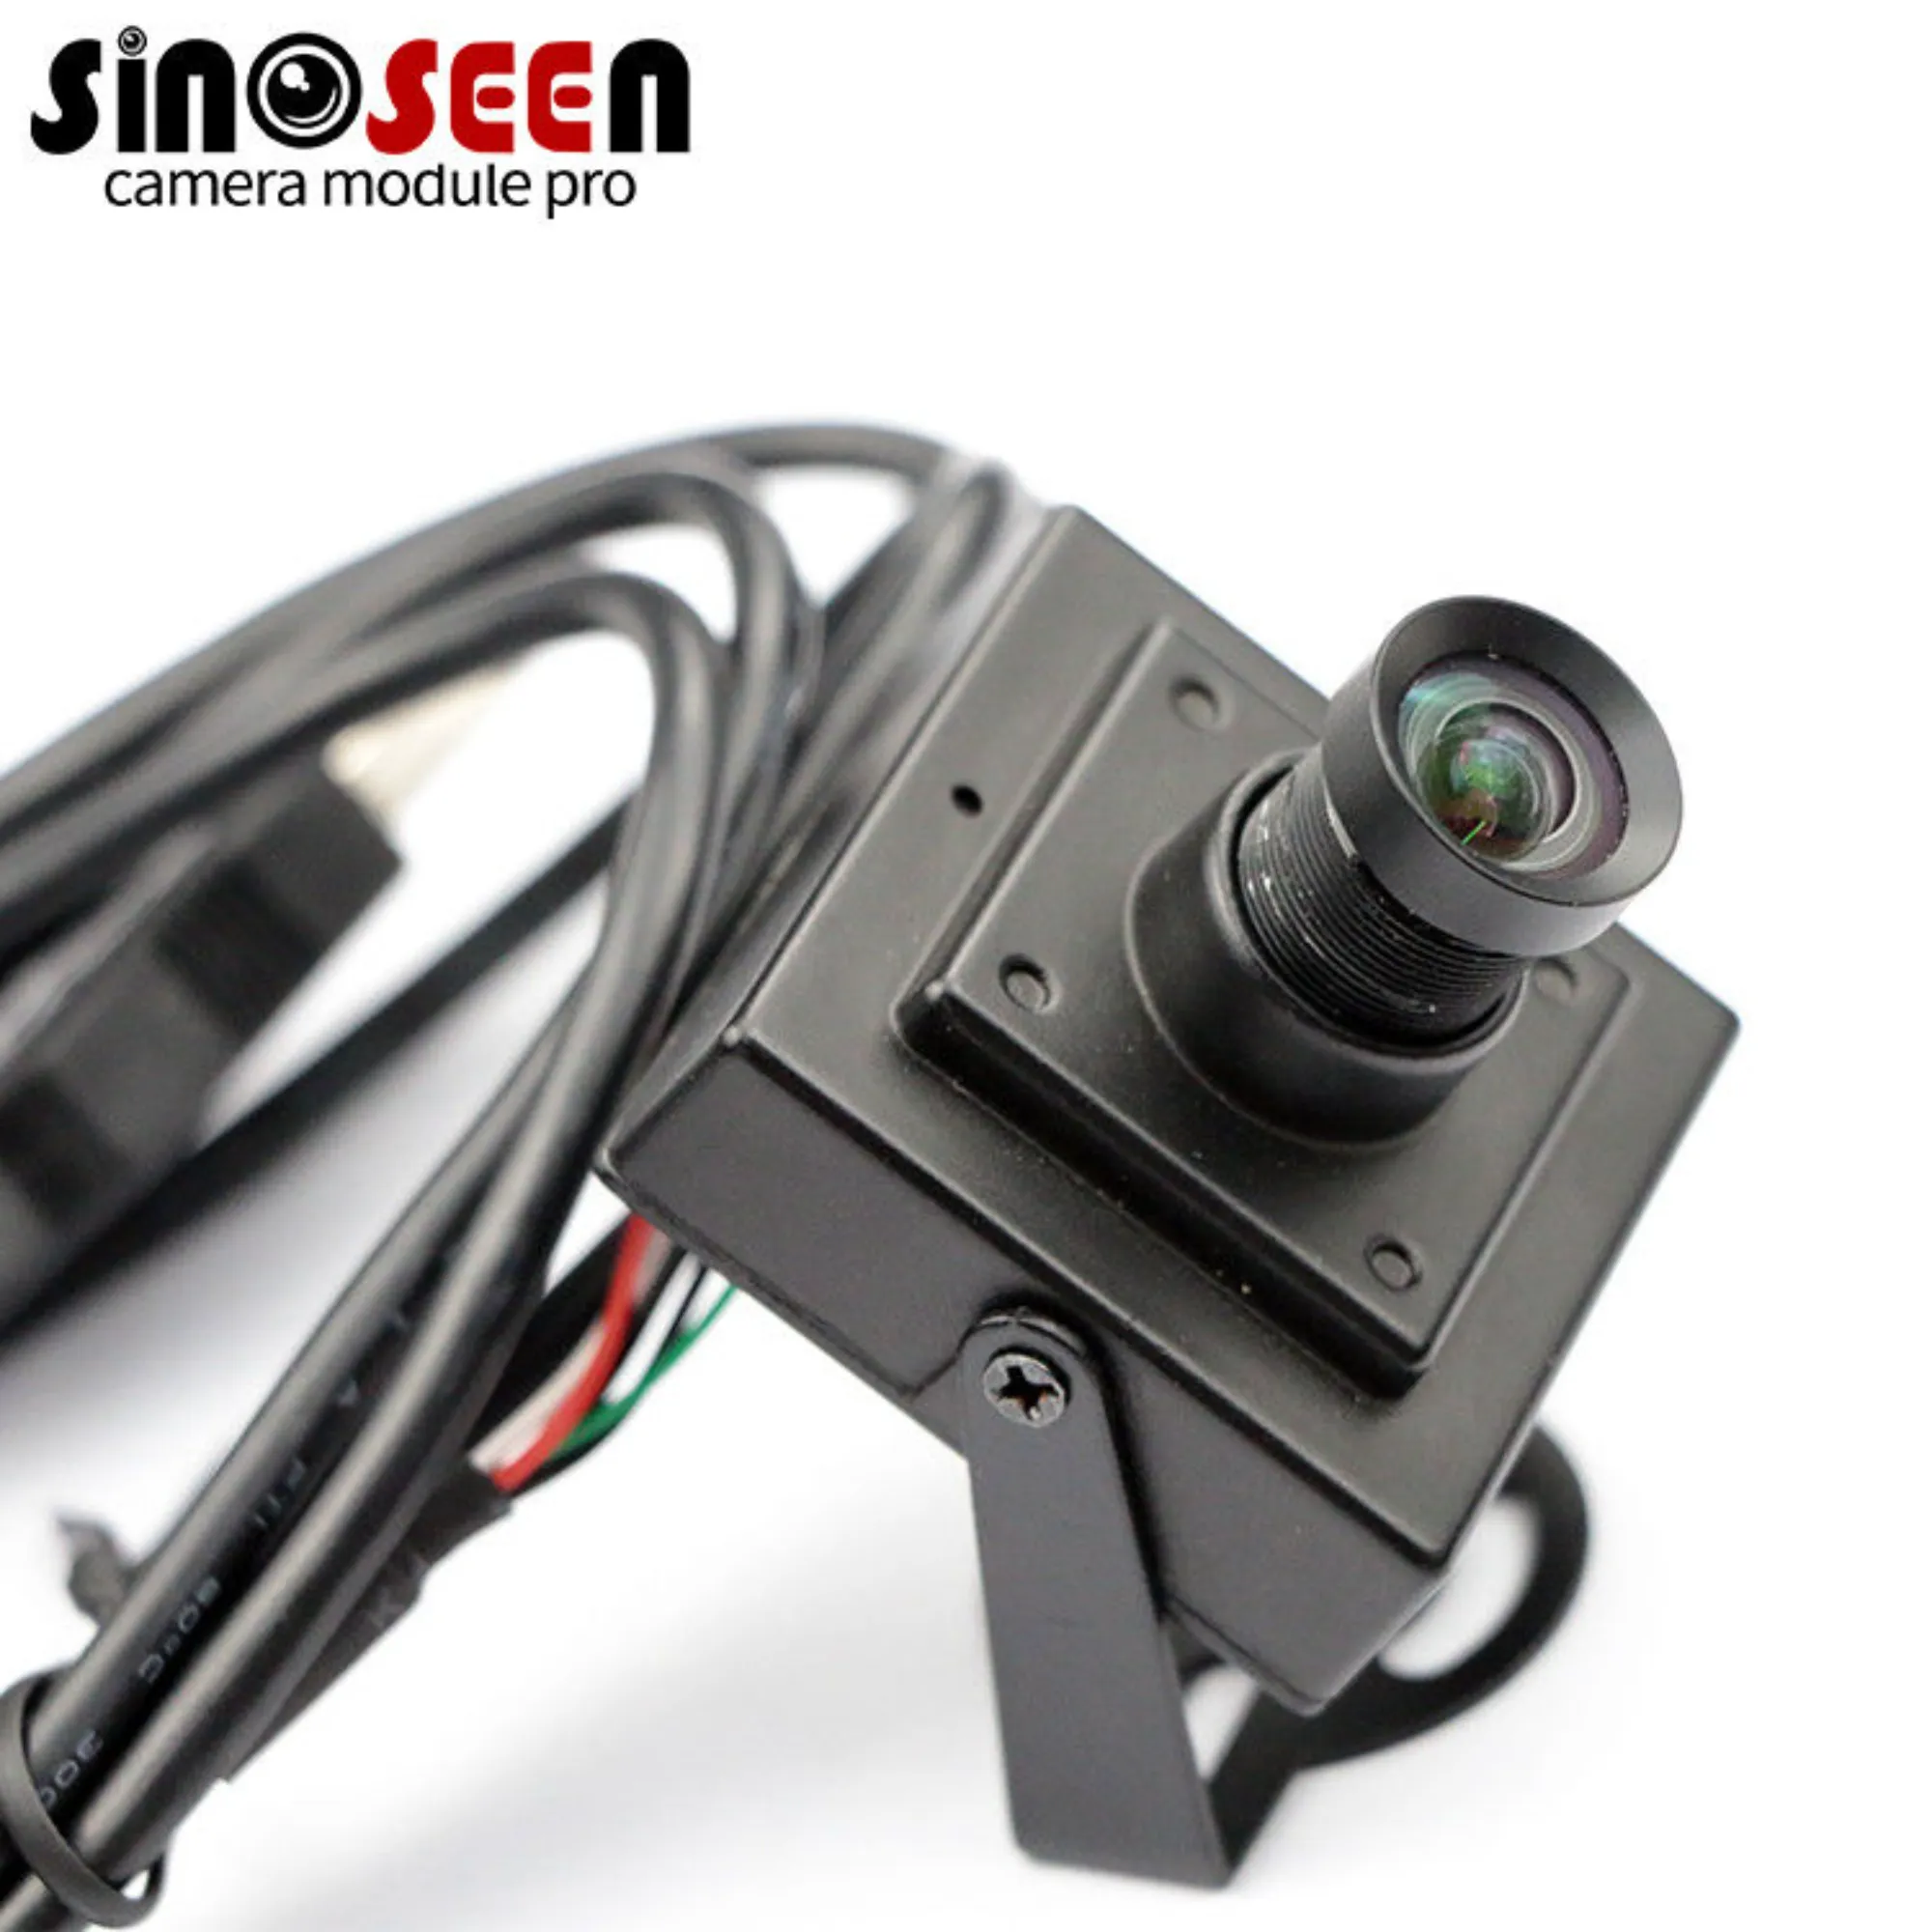 OEM USB Camera Module with Metal Housing 1MP 1080P Full HD for Security Monitoring